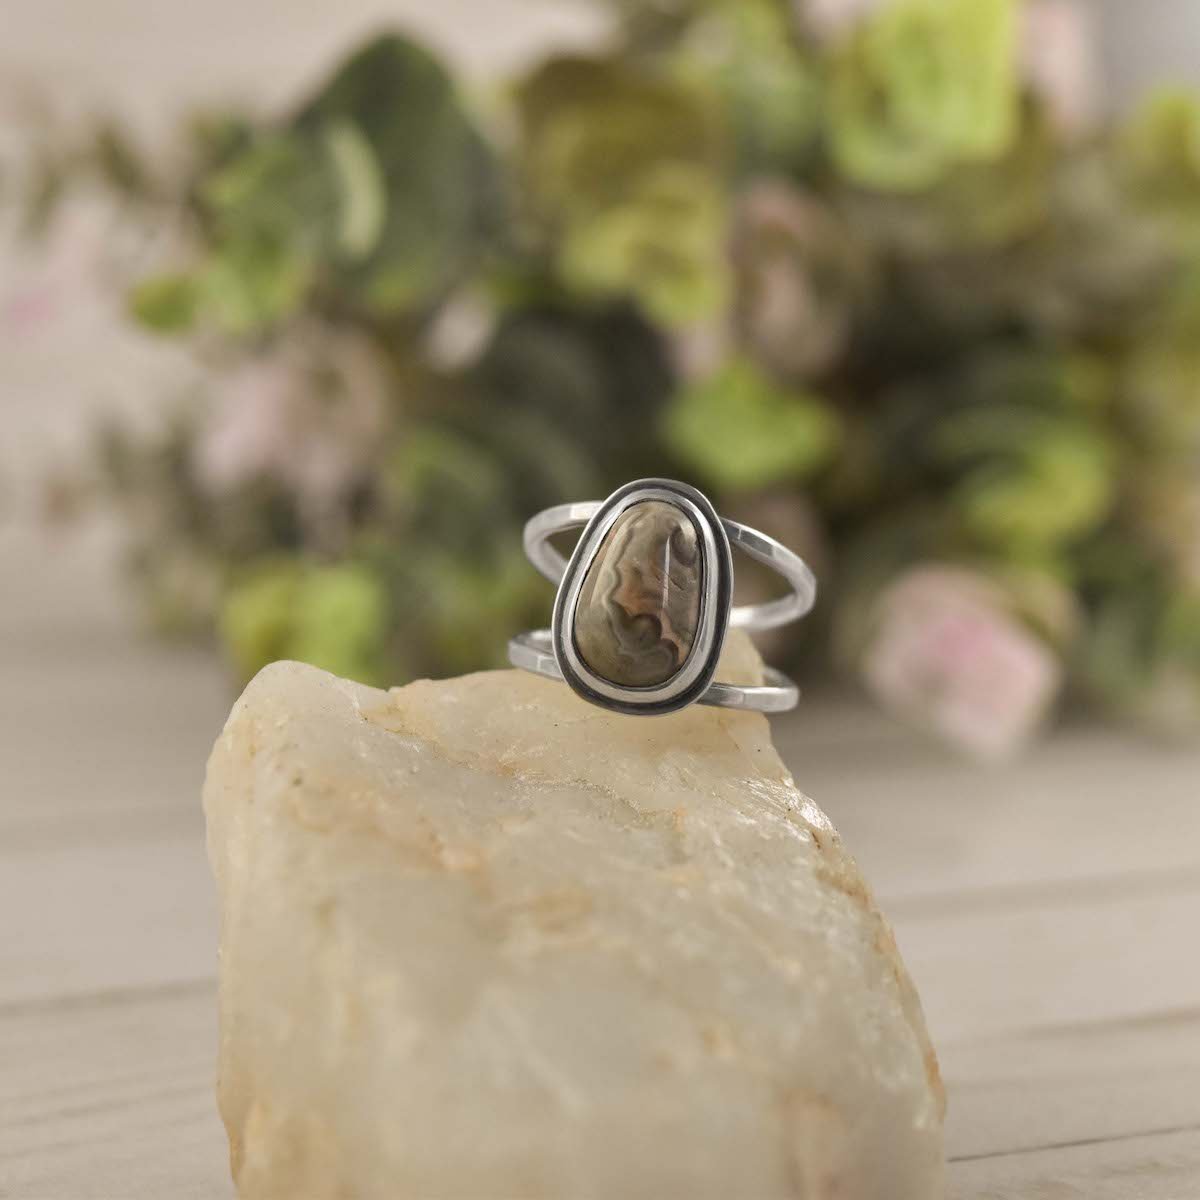 Lake Superior Agate Ring - Size 7.25 - Beth Millner Jewelry